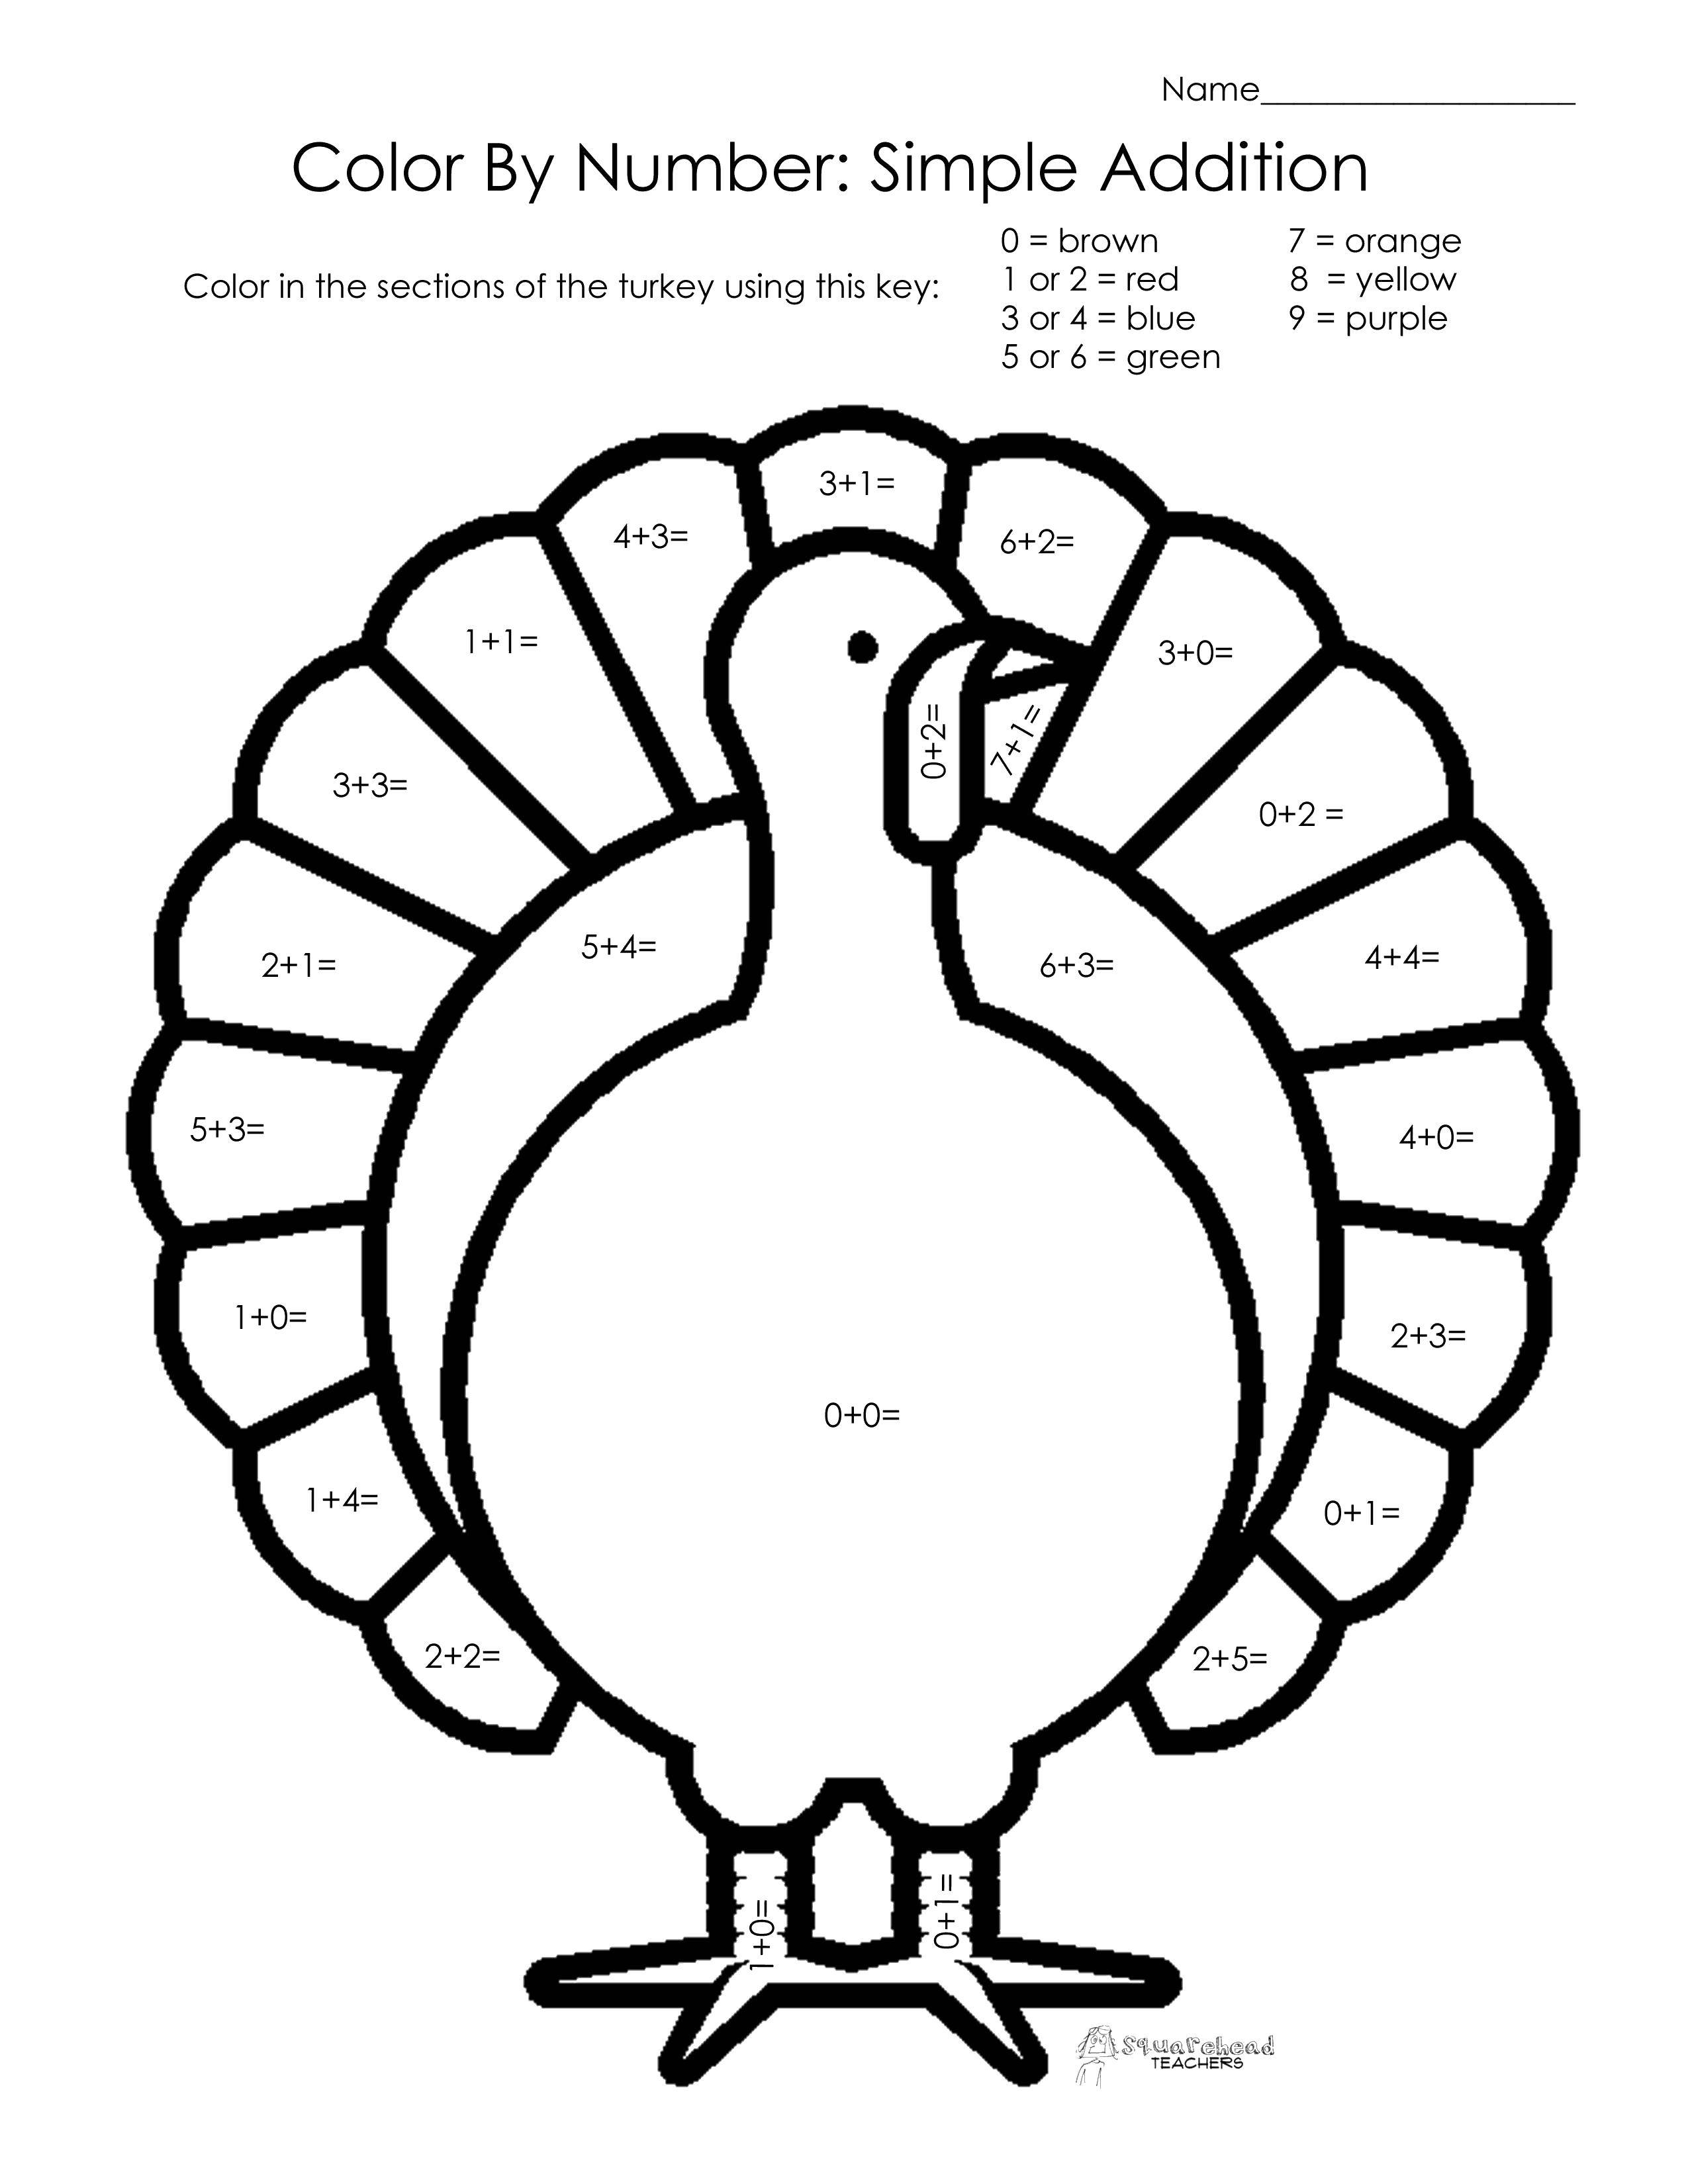 Coloring Color by numbers Turkey tail. Category mathematical coloring pages. Tags:  Math, counting, logic.